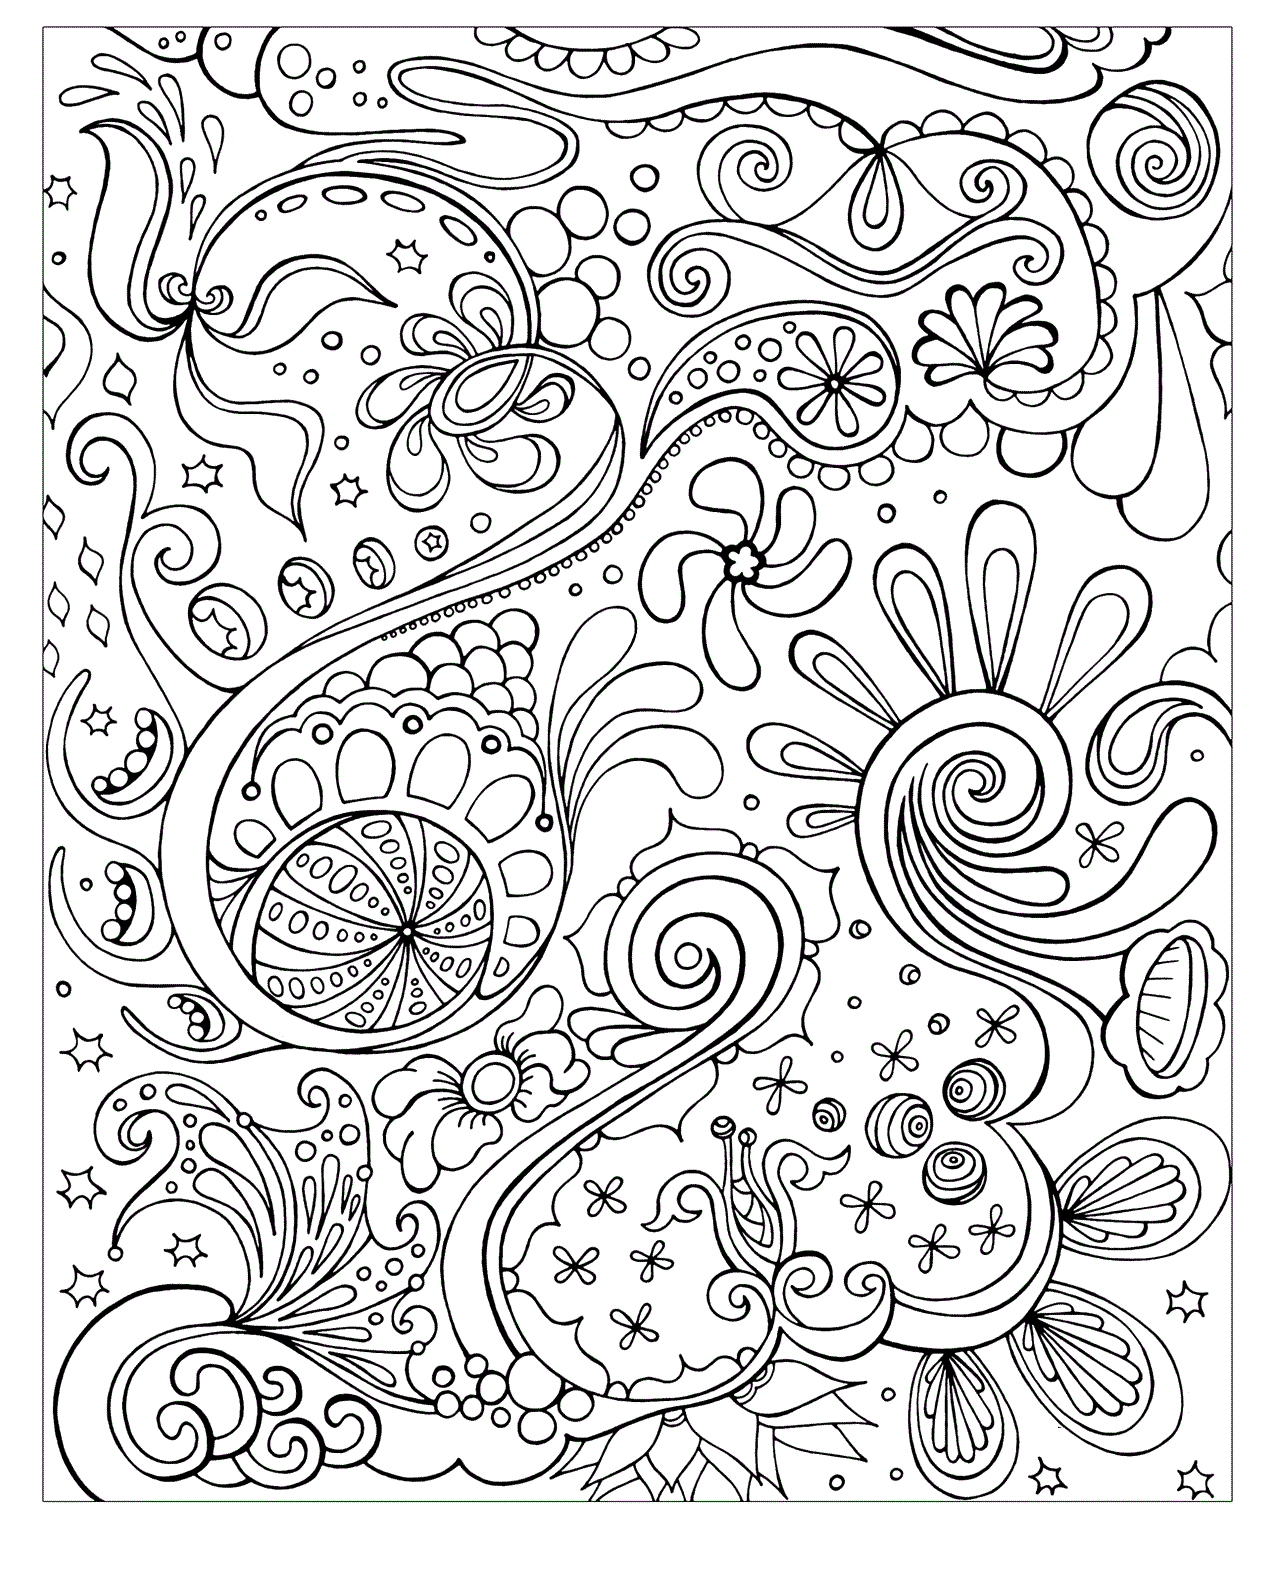 Face and flowers   Anti stress Adult Coloring Pages